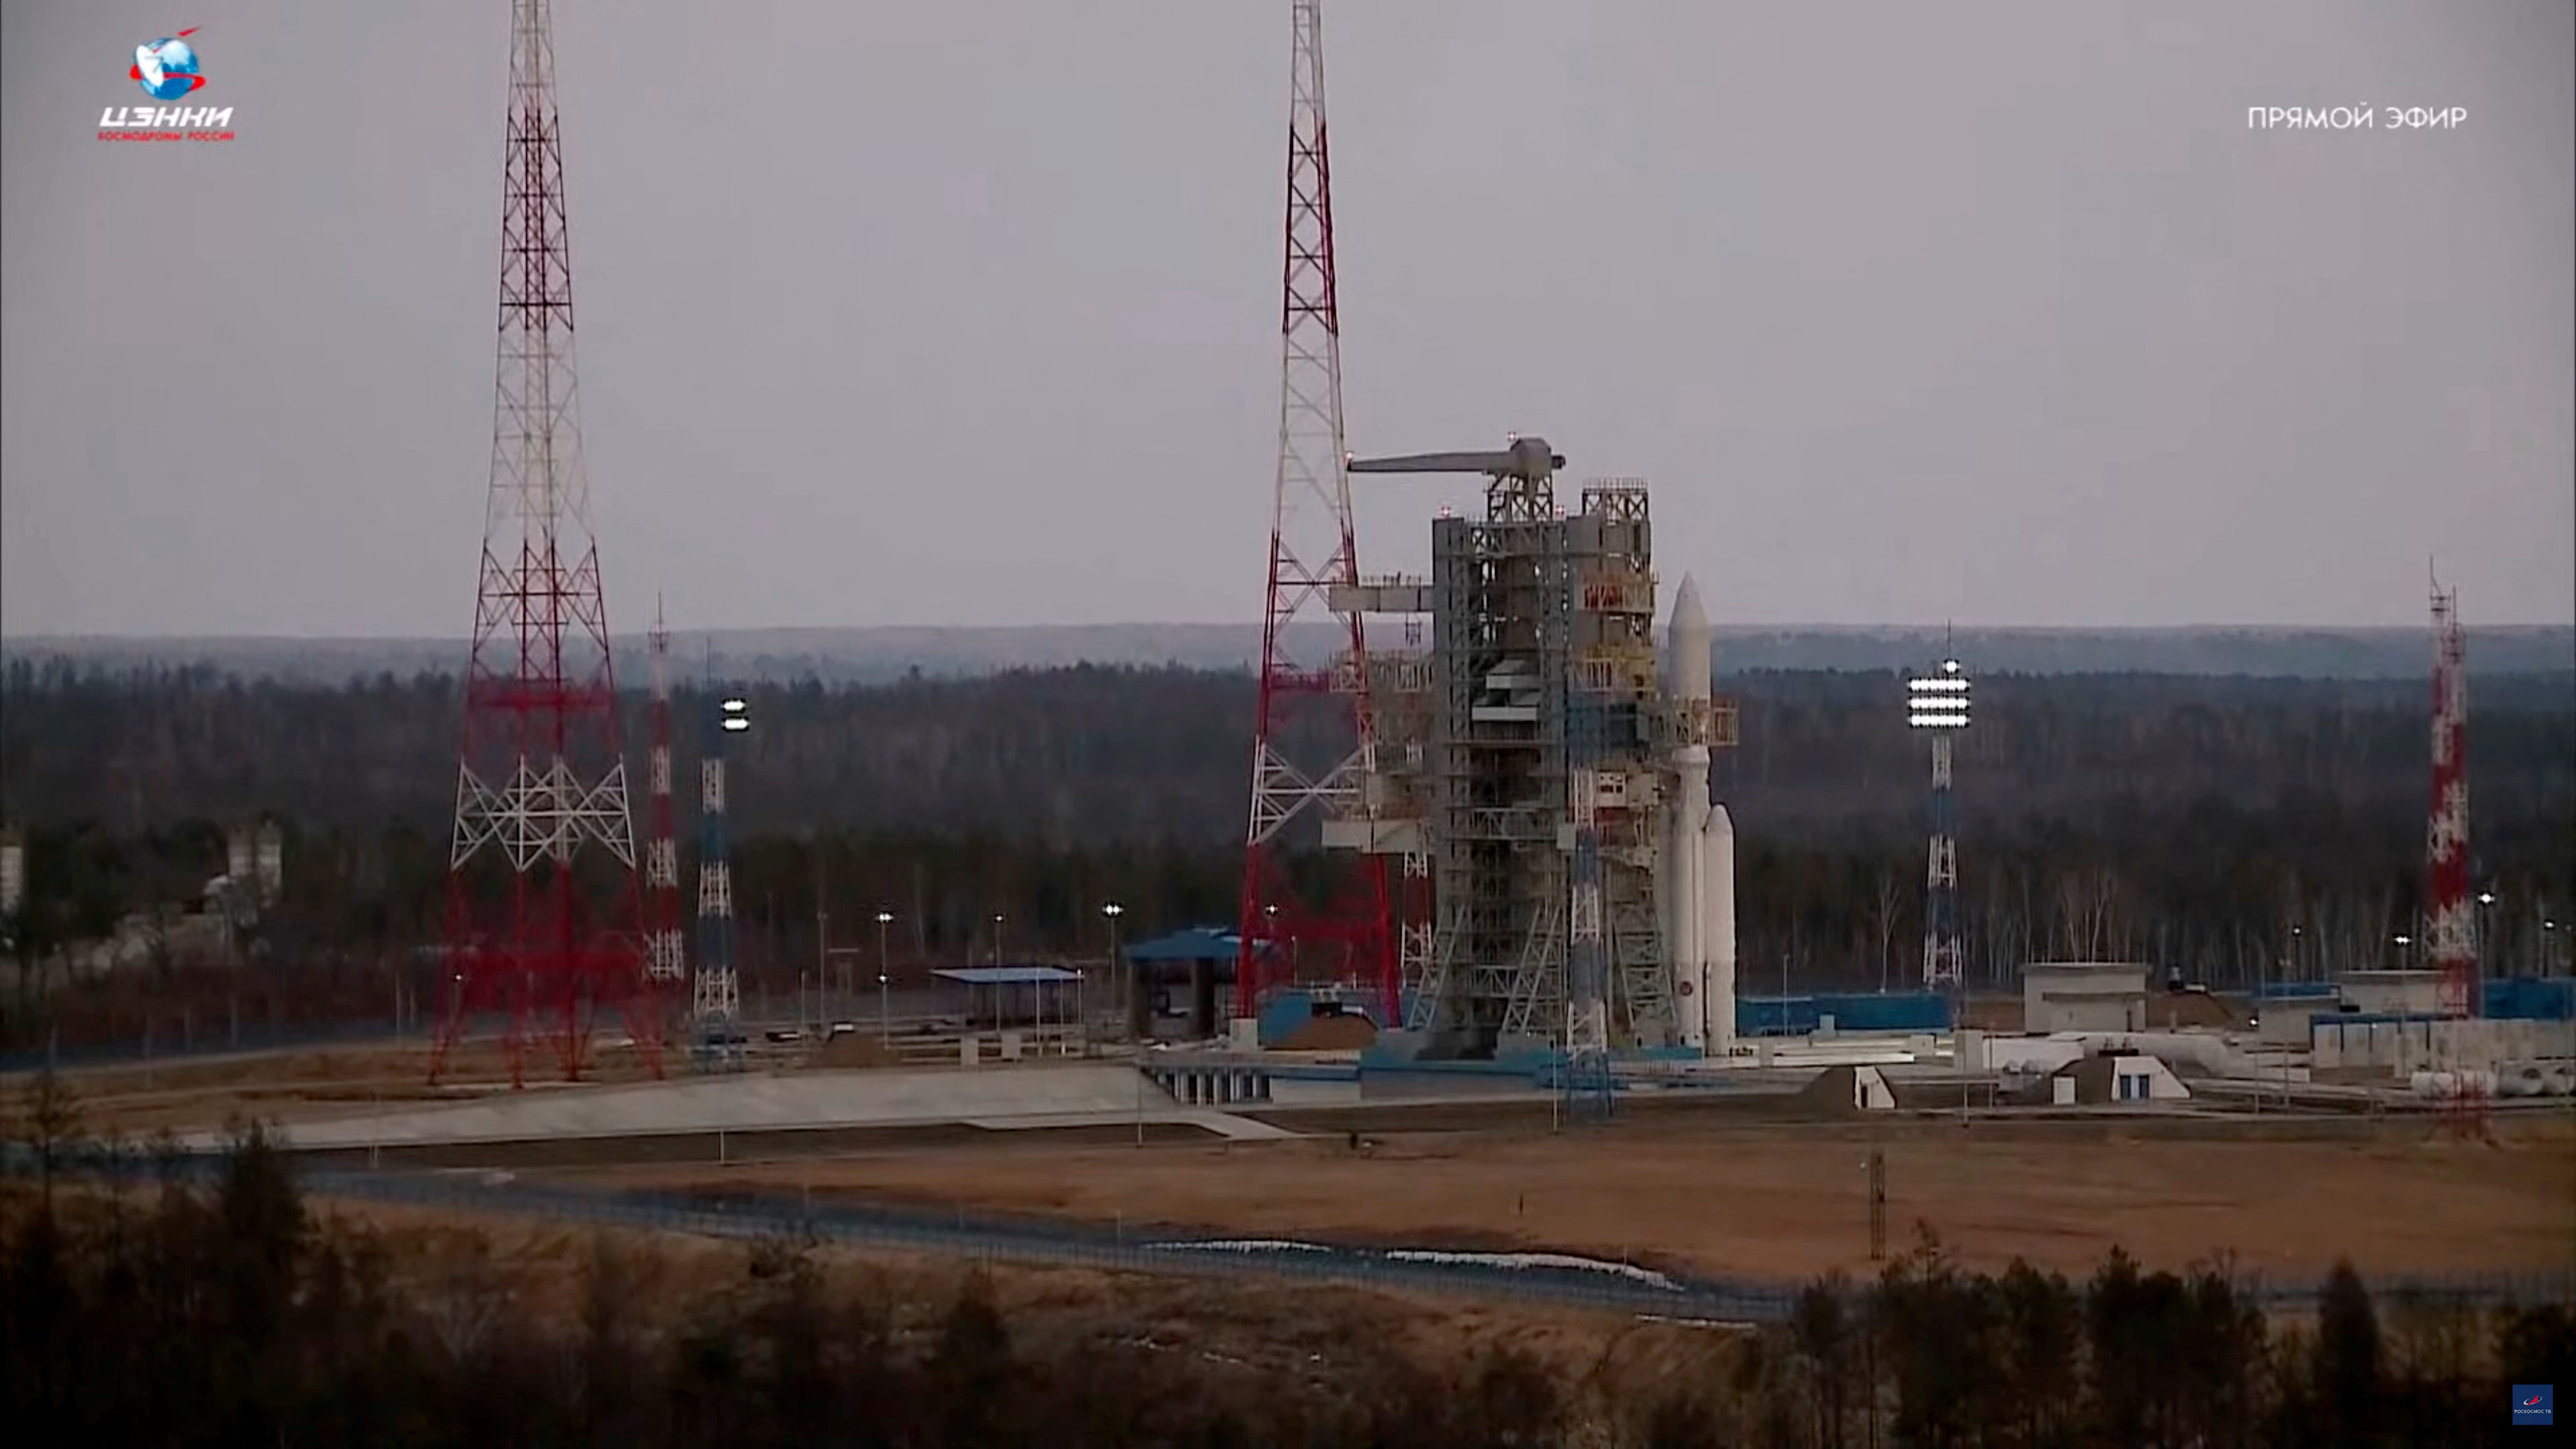 Angara-A5 rocket is seen on its launchpad at the Vostochny Cosmodrome